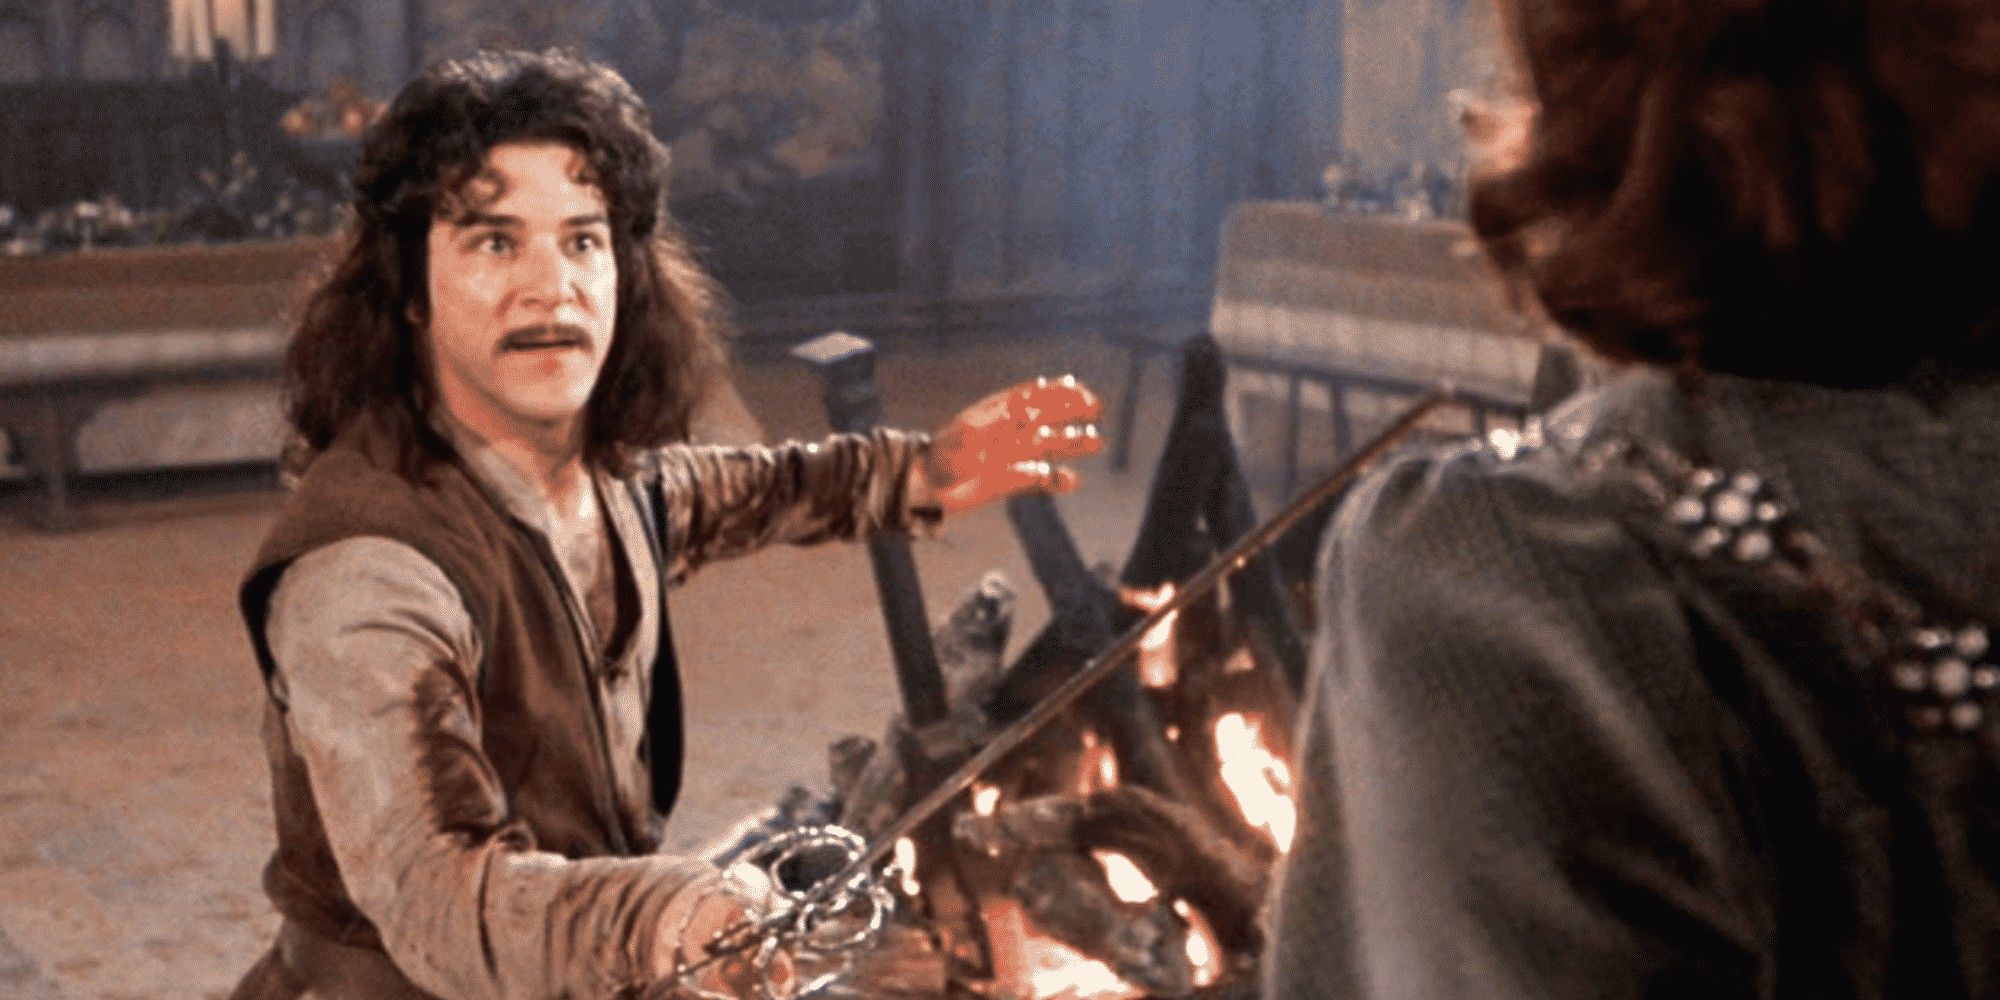 The Princess Bride Mandy Patinkin as Inigo Montoya and Christopher Guest as Count Tyrone Rugen Duel